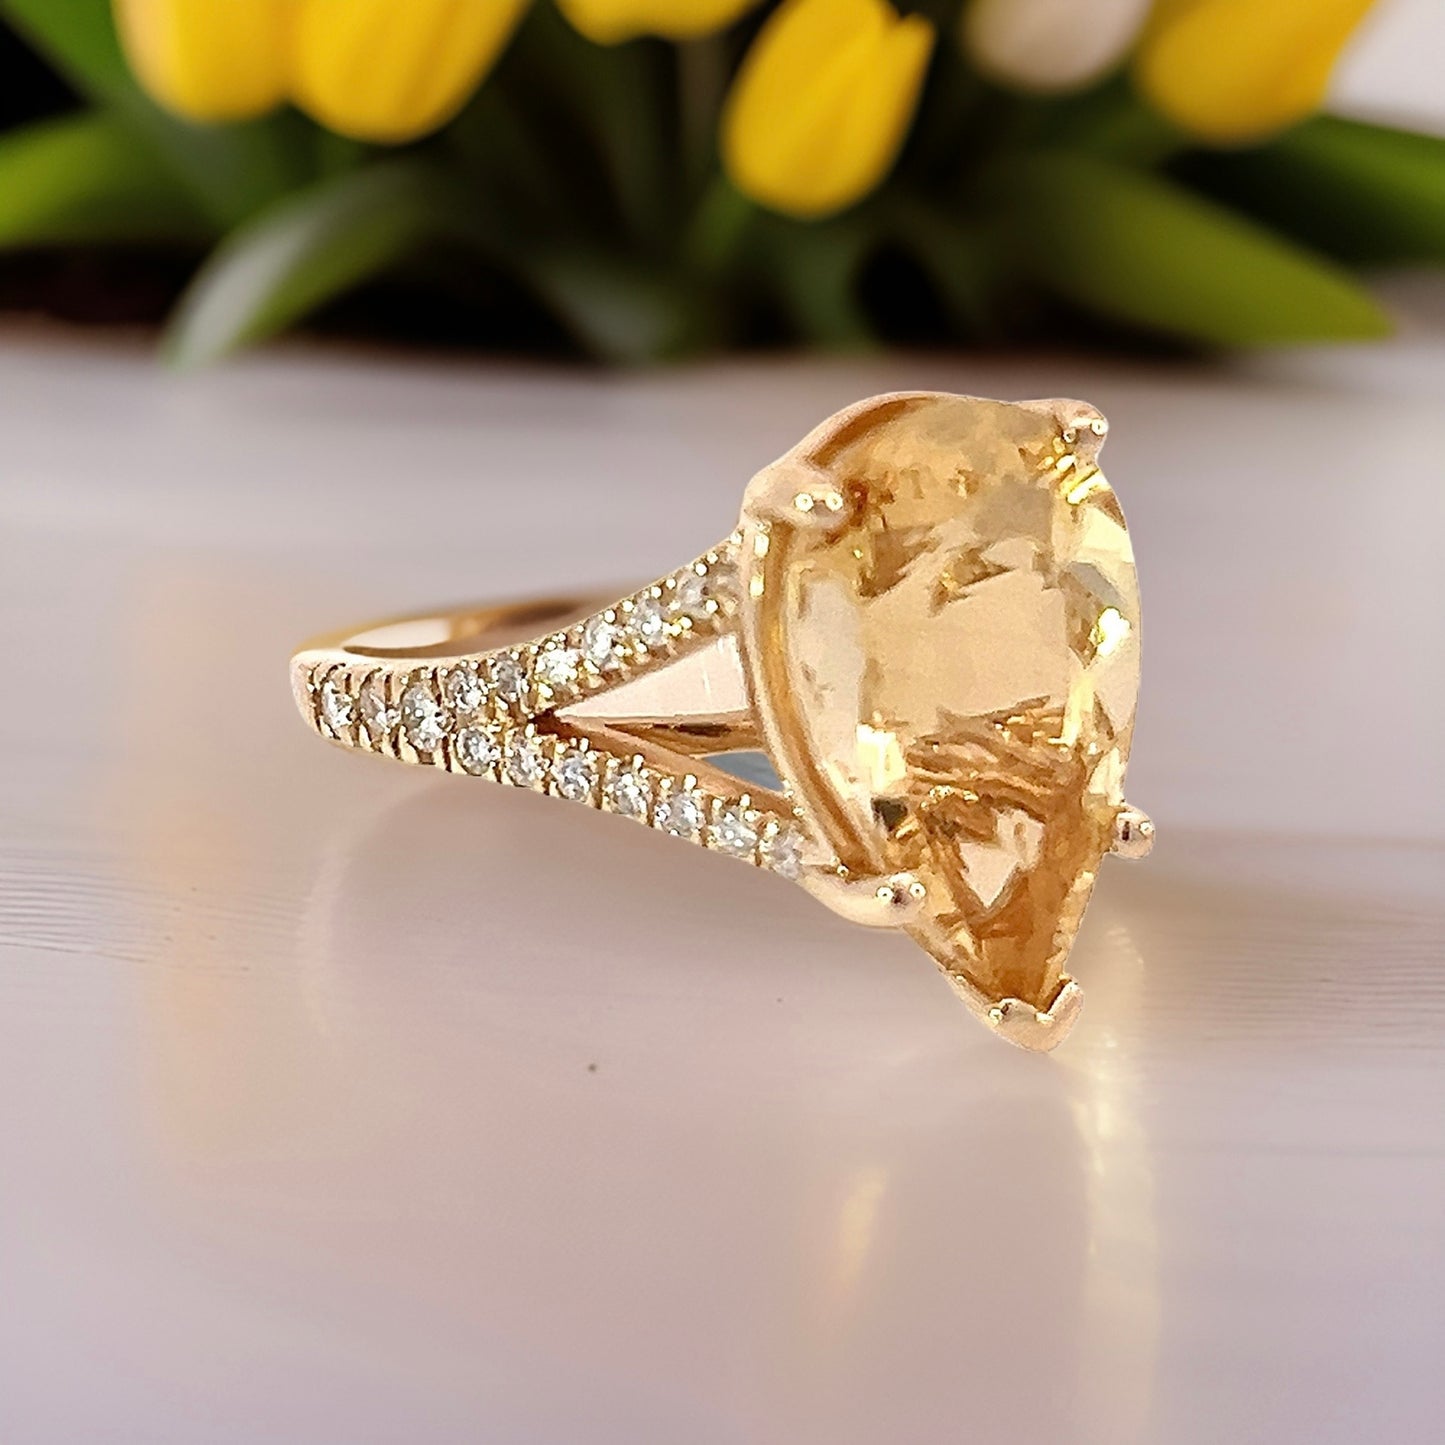 Natural Citrine Diamond Ring 6.5 14k Y Gold 4.79 TCW Certified $3,950 310632